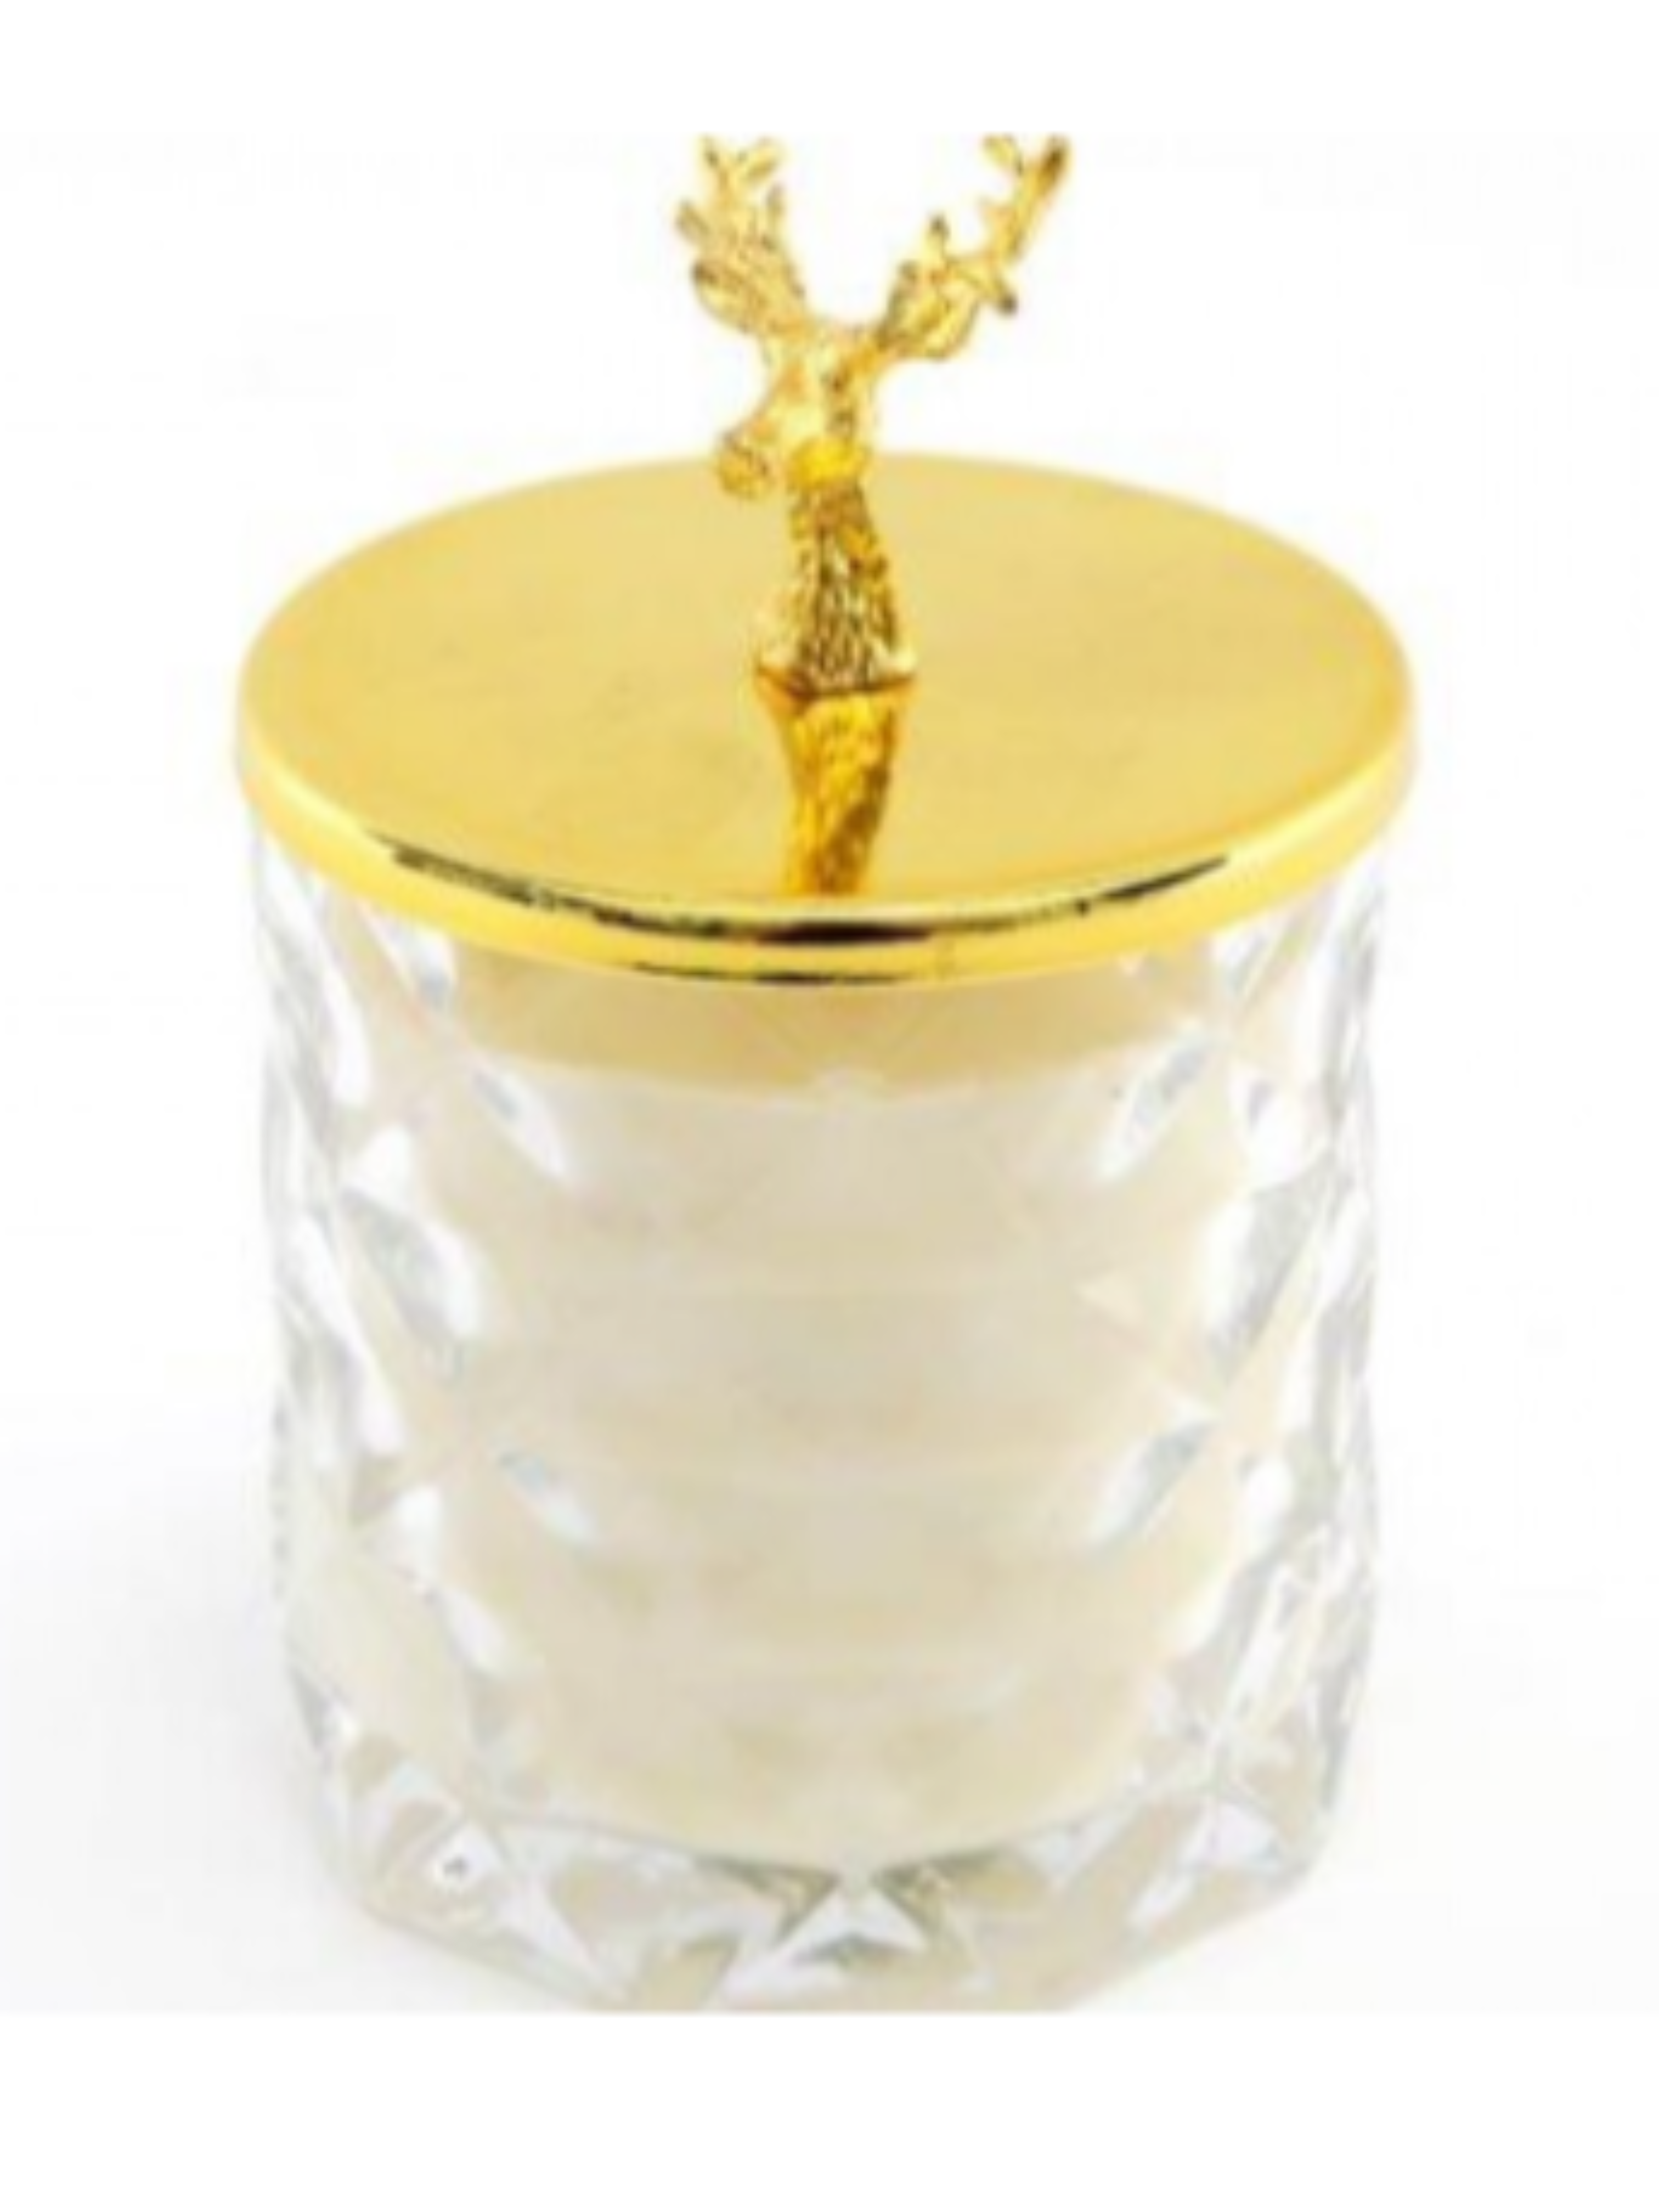 Golden Stag Lemon and Lavender Scented Candle